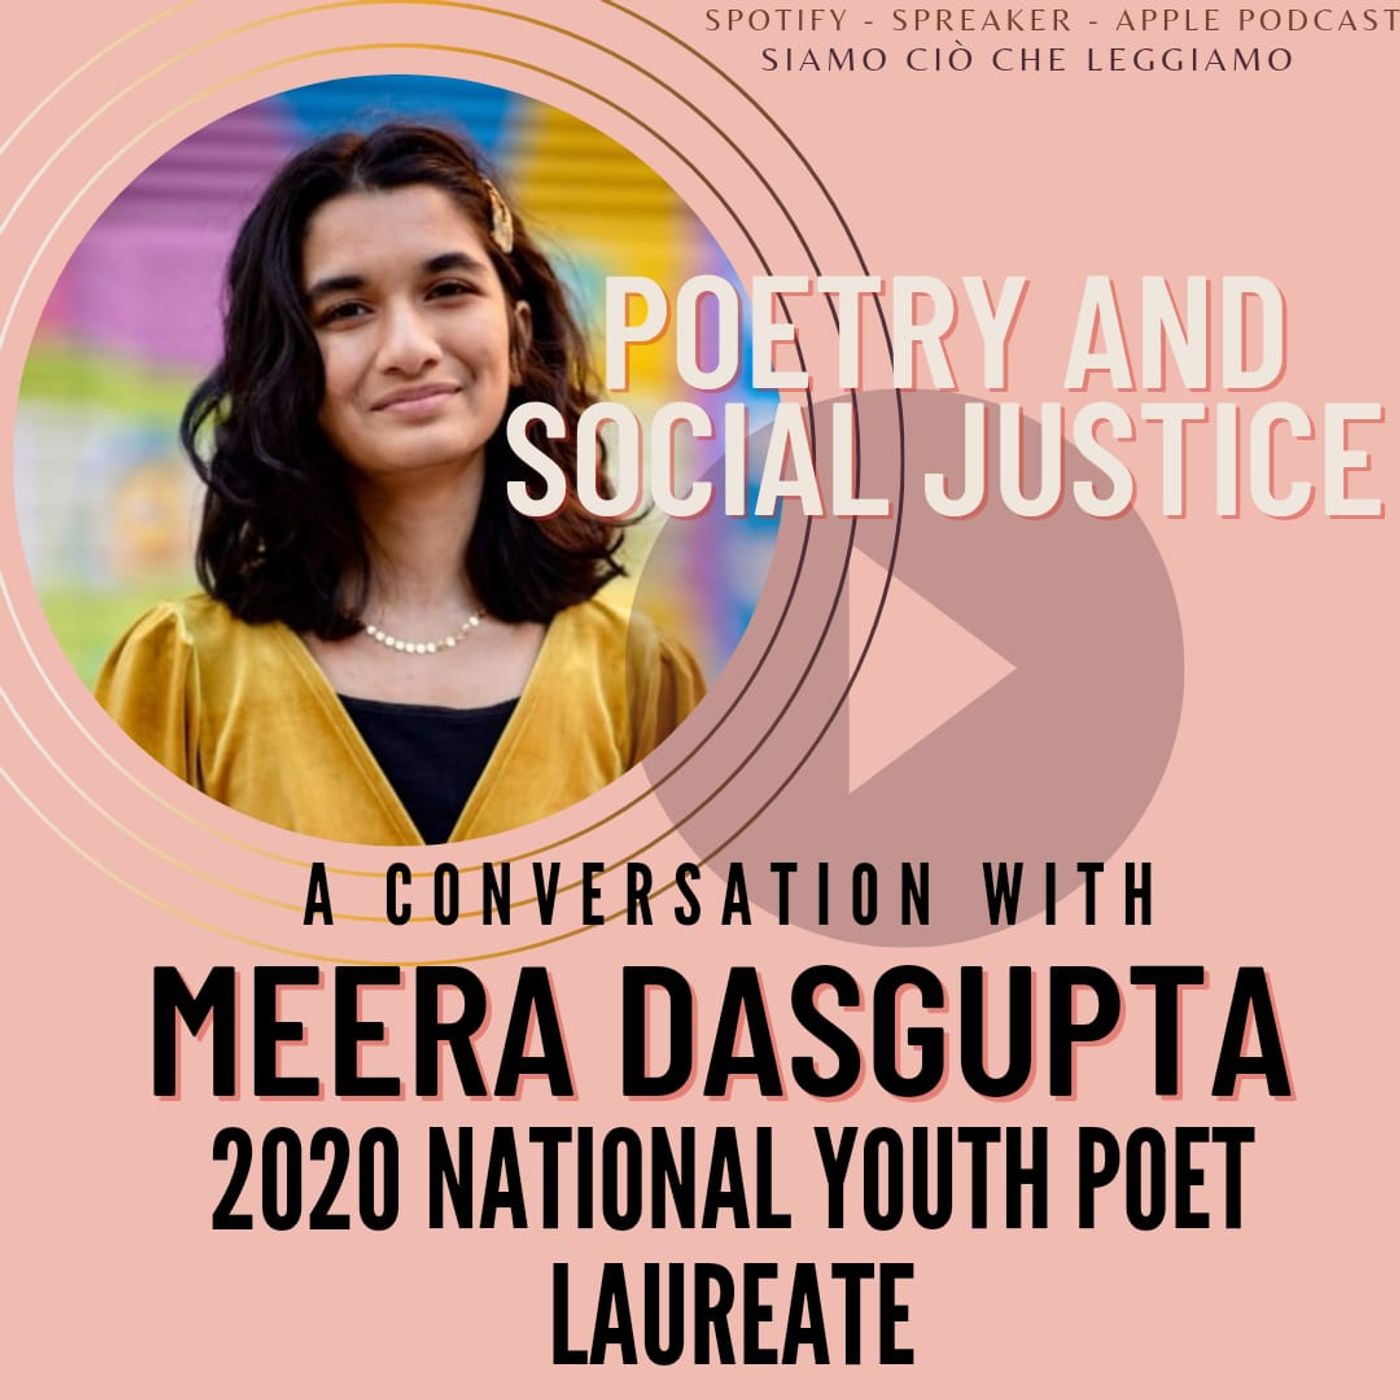 POETRY & SOCIAL JUSTICE: a conversation with Meera Dasgupta, National Youth Poet Laureate 2020